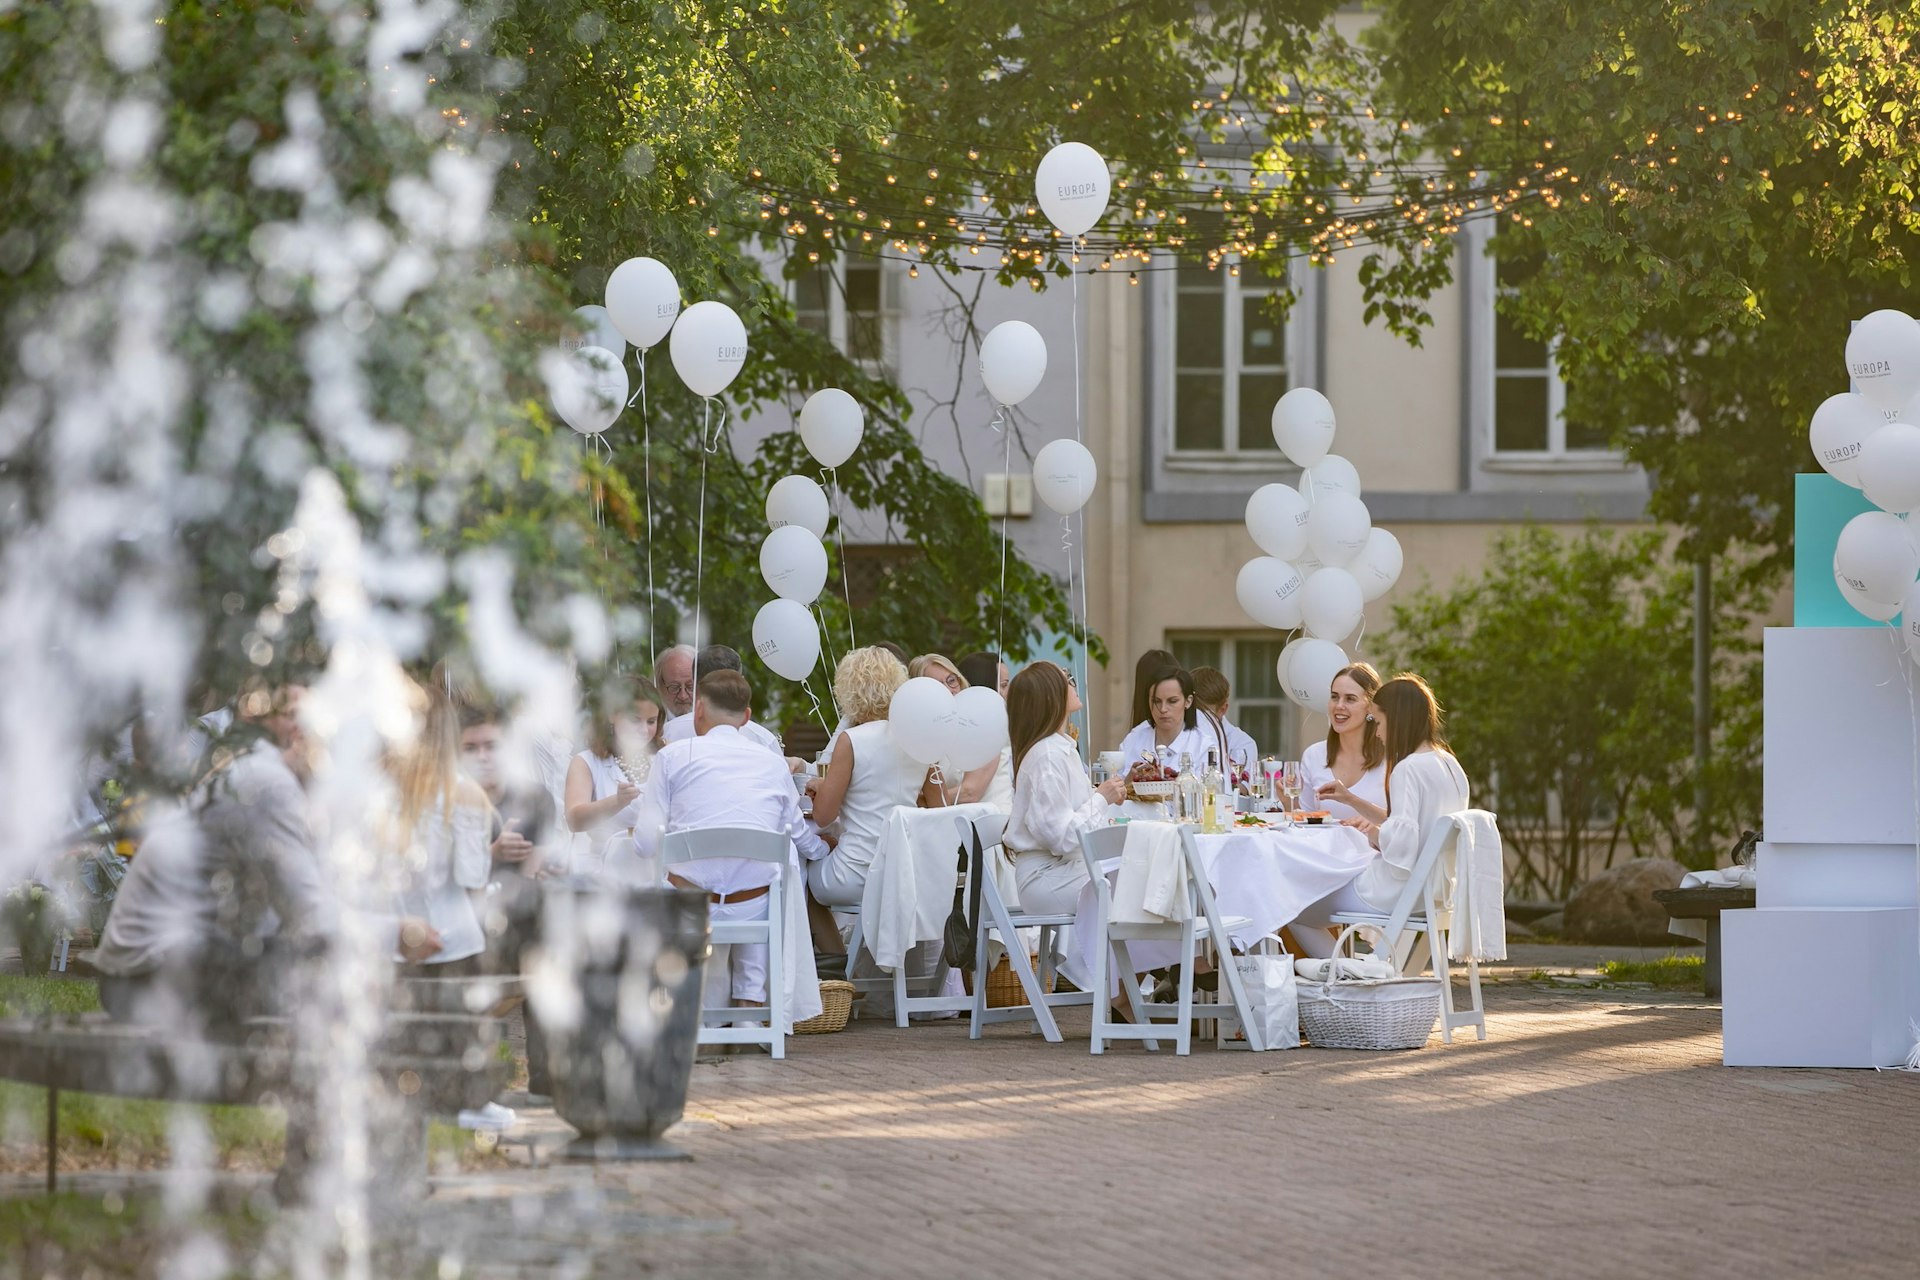 People dreesed in white at an event in Vilnius